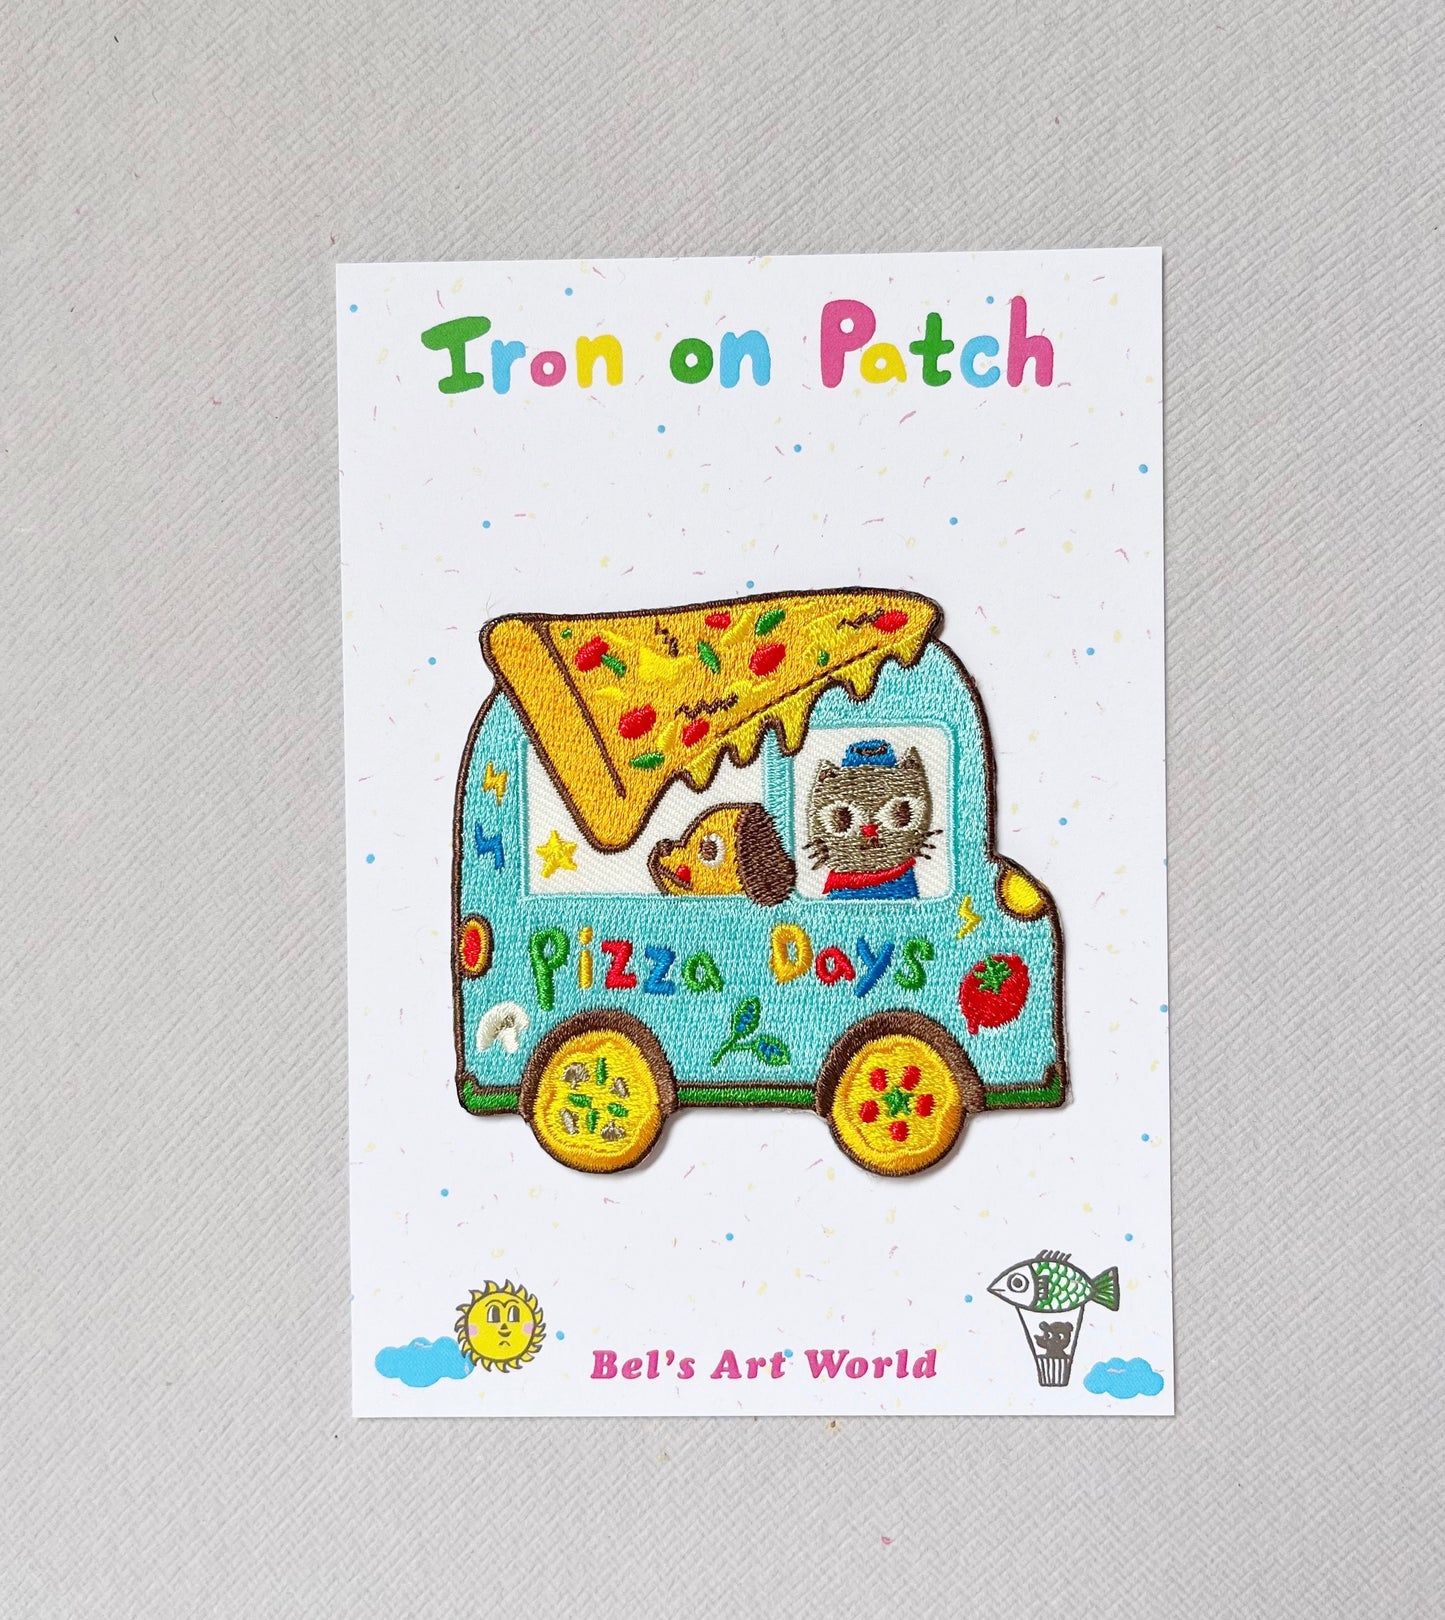 Pizza days - cute pizza truck Iron On Patch